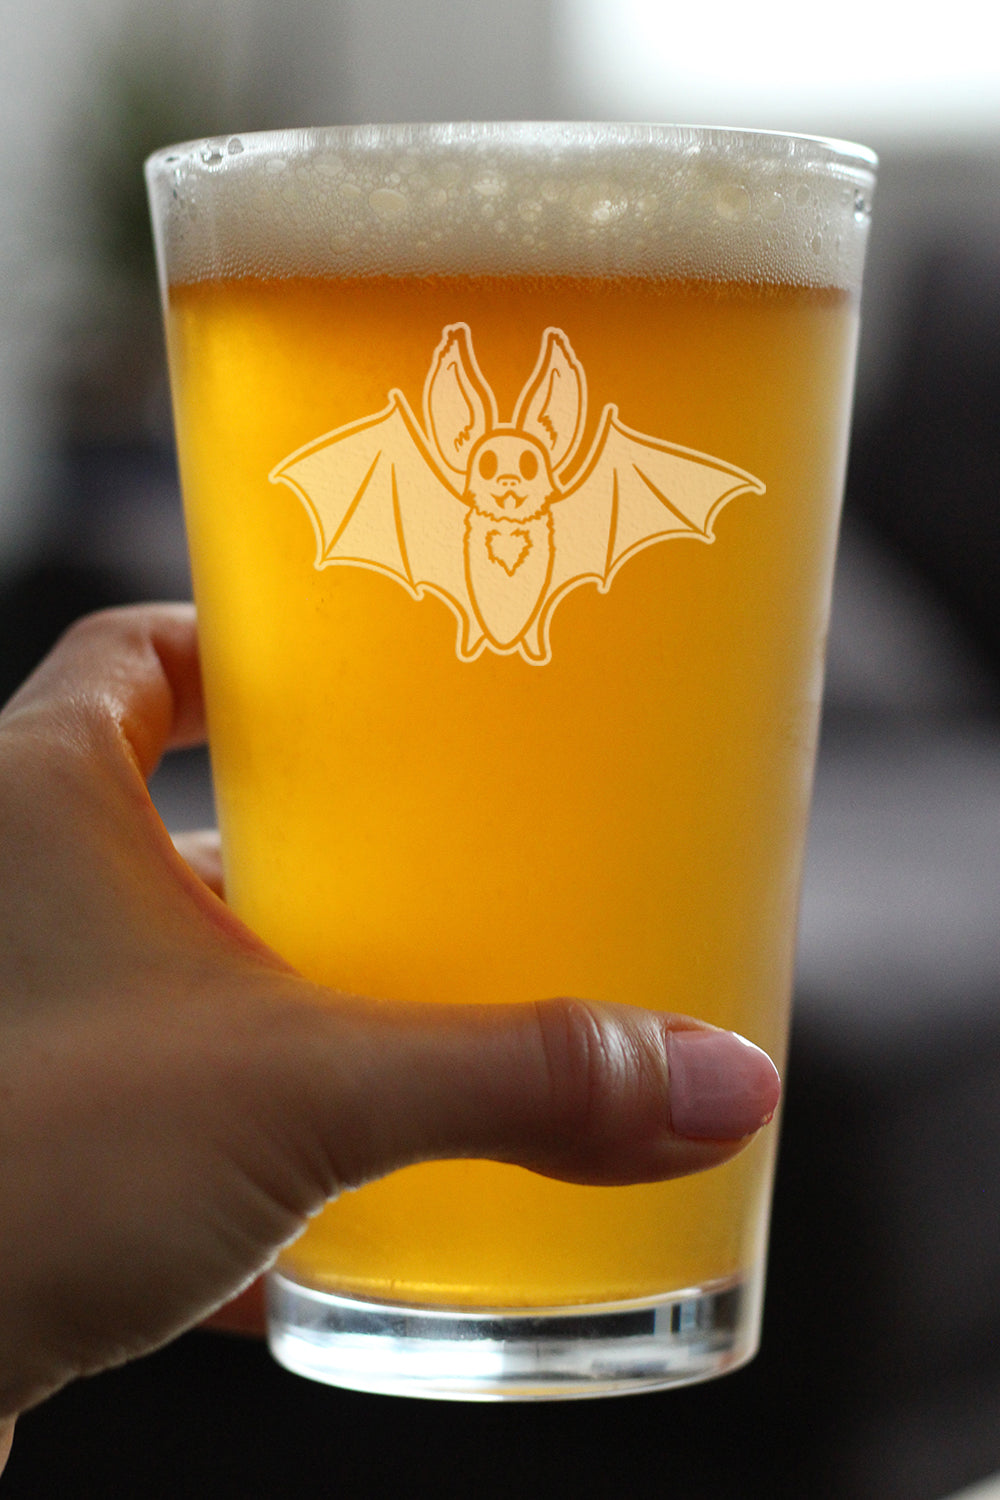 Bat Pint Glass for Beer - Funny Cute Bat Gifts - Spooky Fun Halloween Decor with Bats - 16 oz Glasses